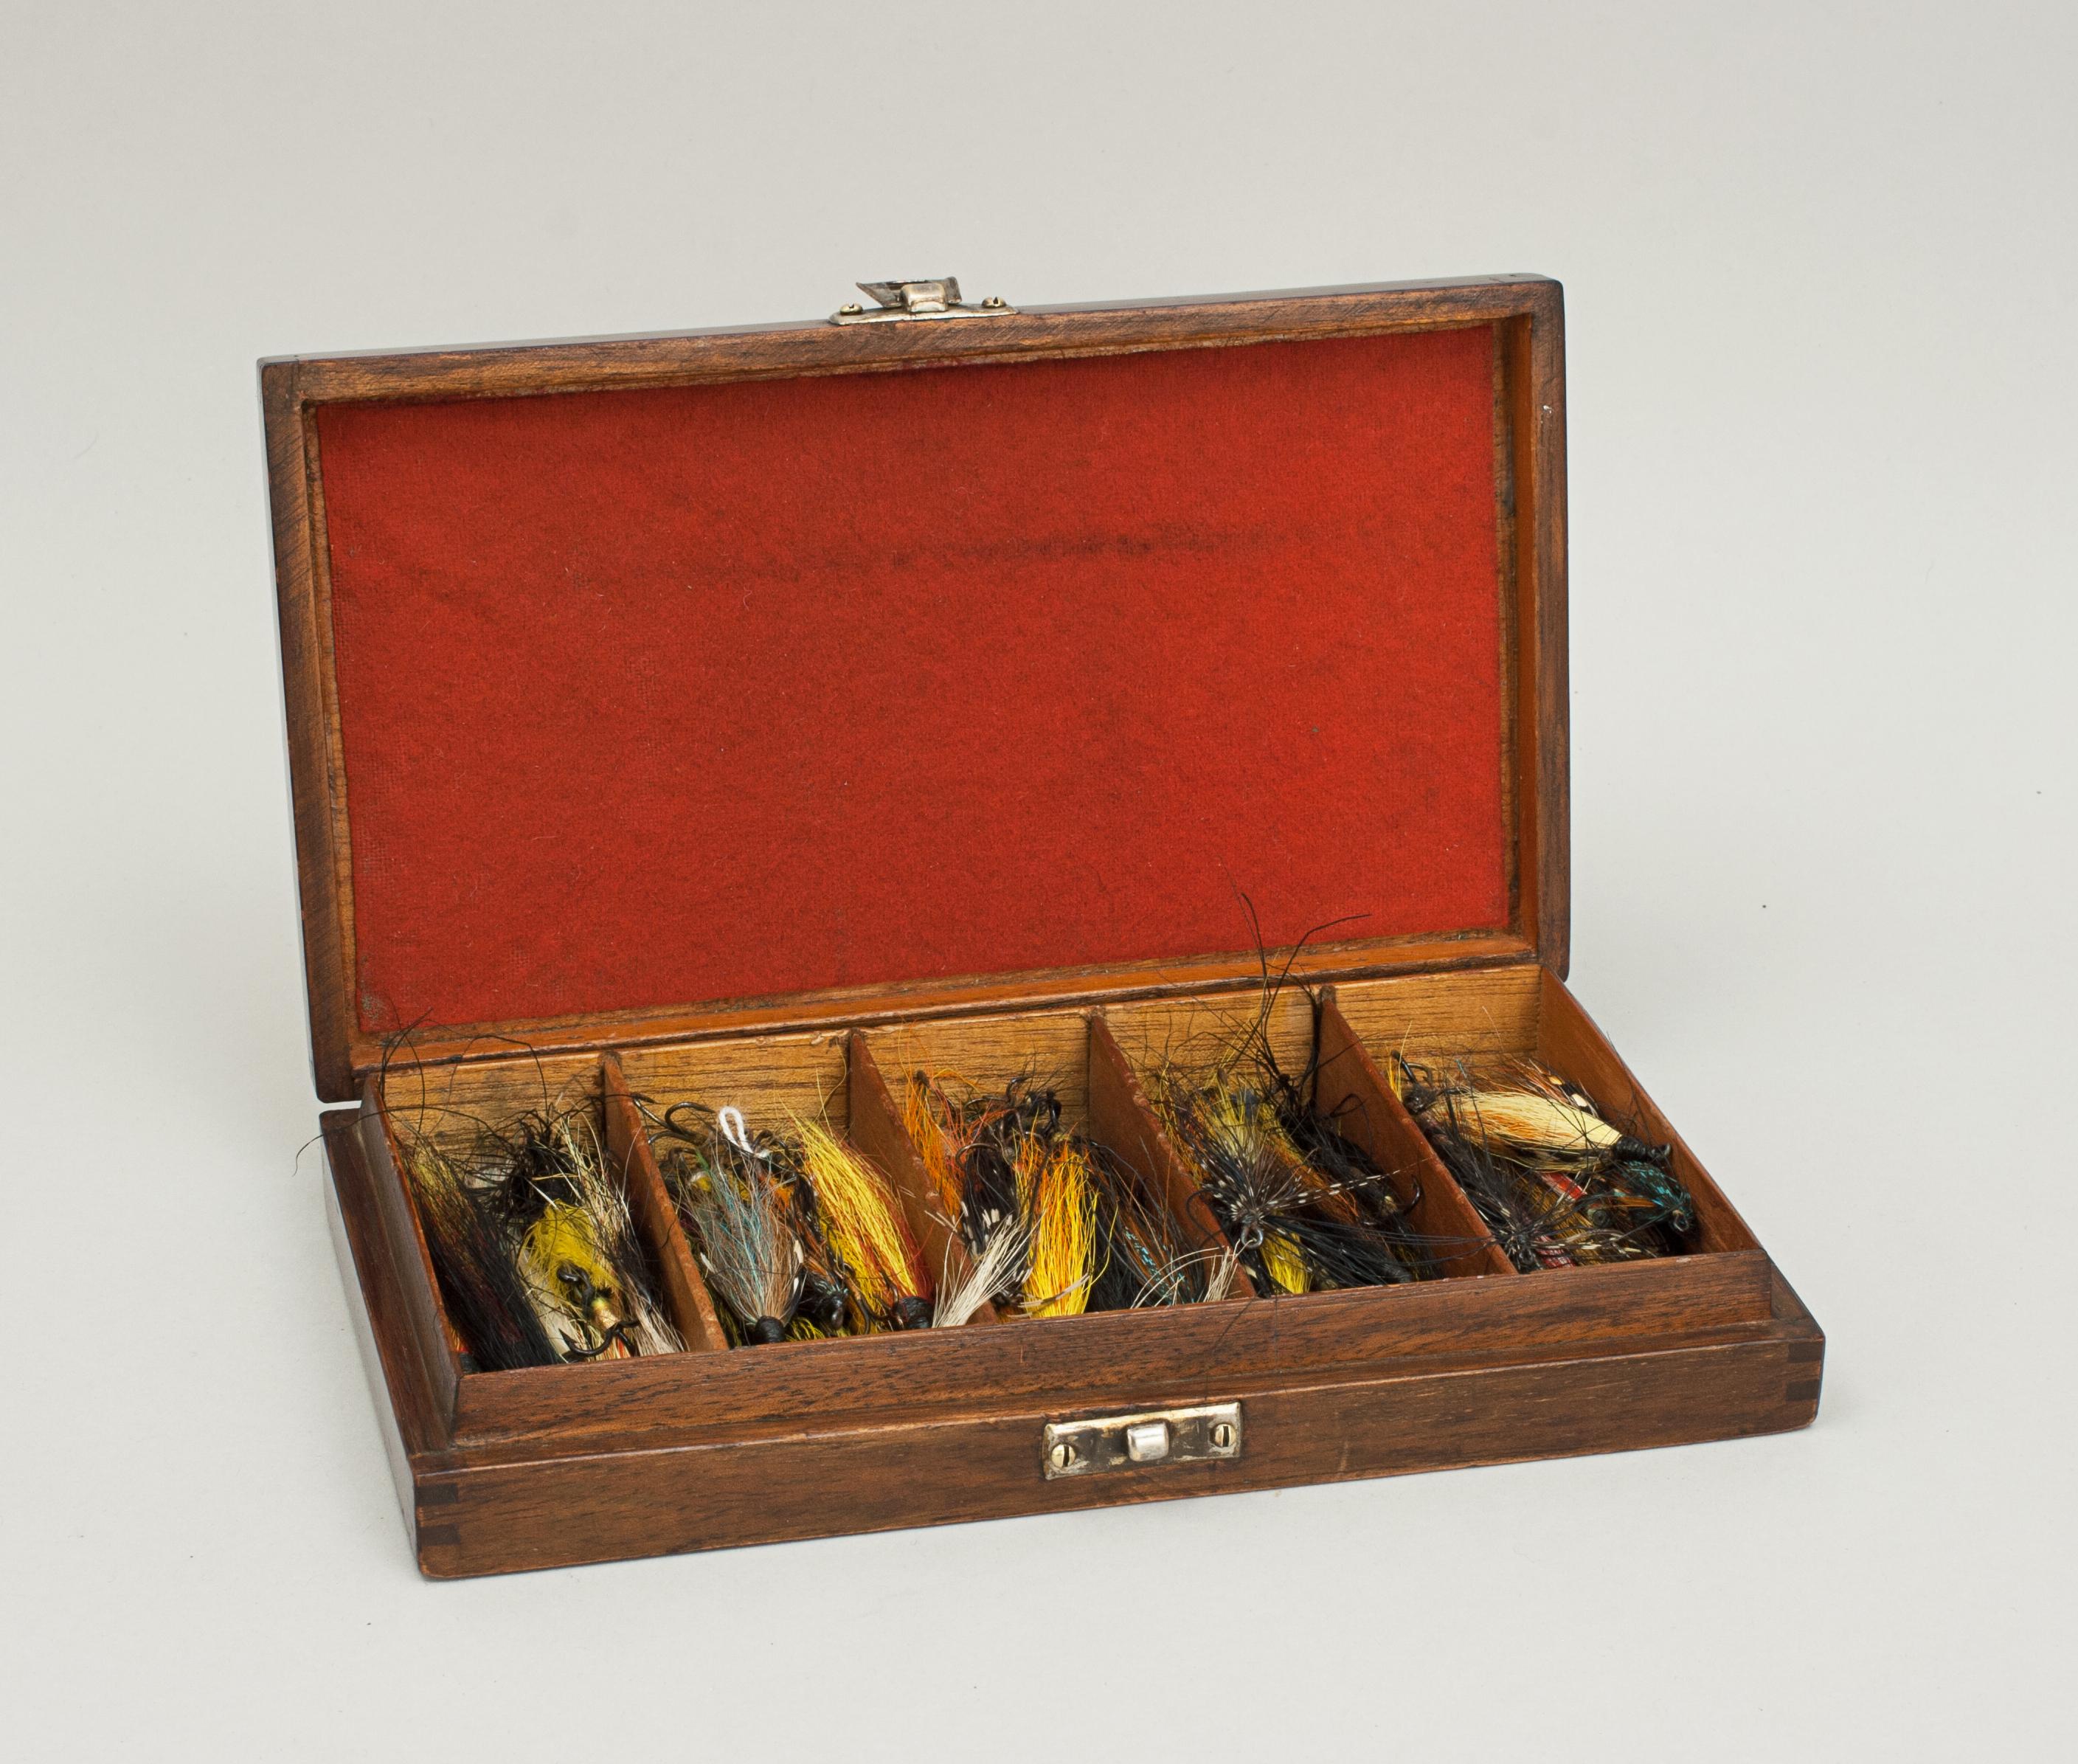 Wooden fly box, Hardy Bros.
A very nice mahogany fly box with five compartments full of dressed salmon flies. The lid has a nickel 'Hardy Bros. Ltd.' oval badge pinned on the outside, on the interior there is some red baize.